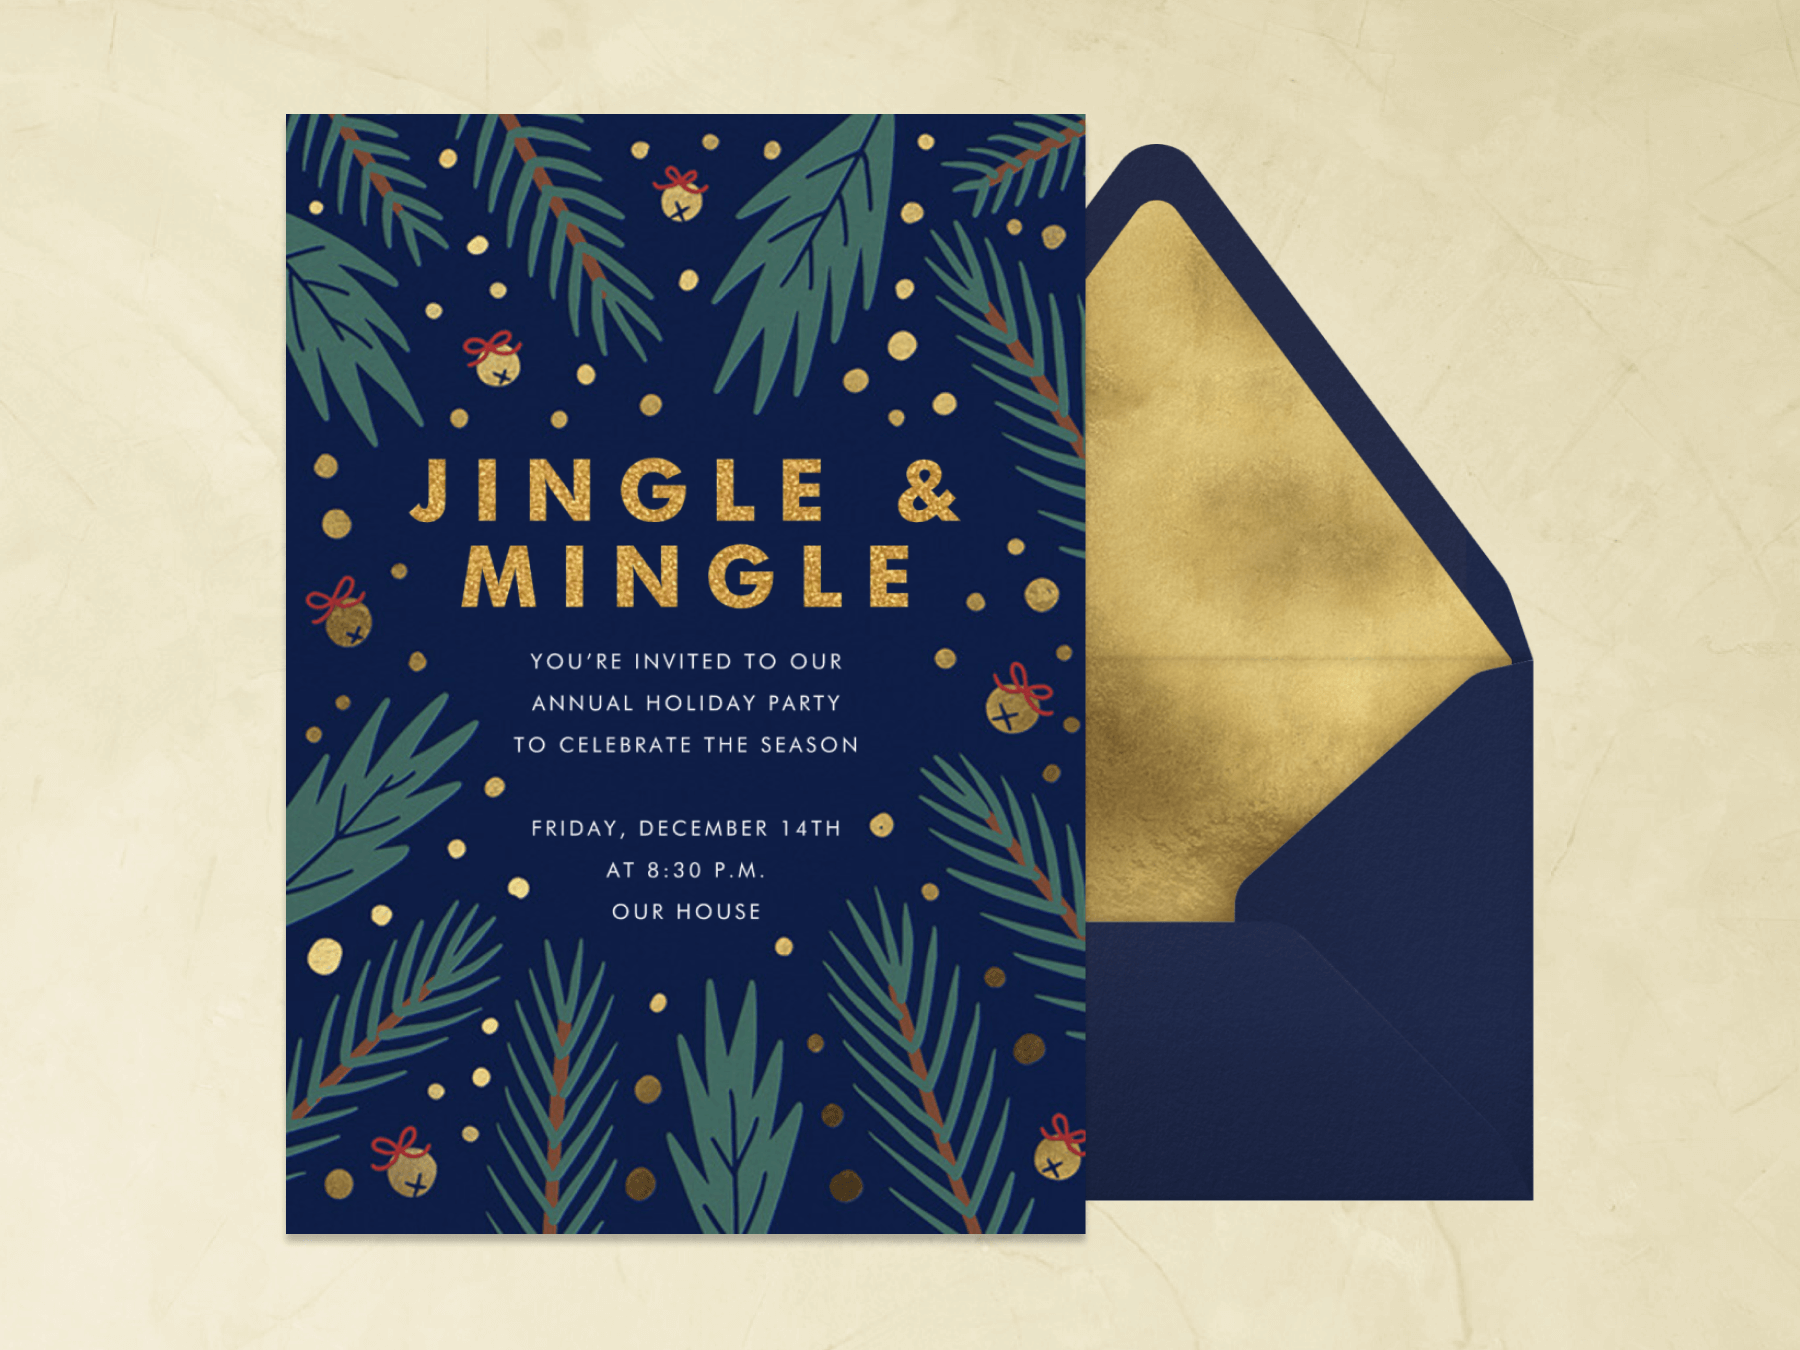 A navy blue holiday party invitation with fir branches, gold dots, and little gold bells.